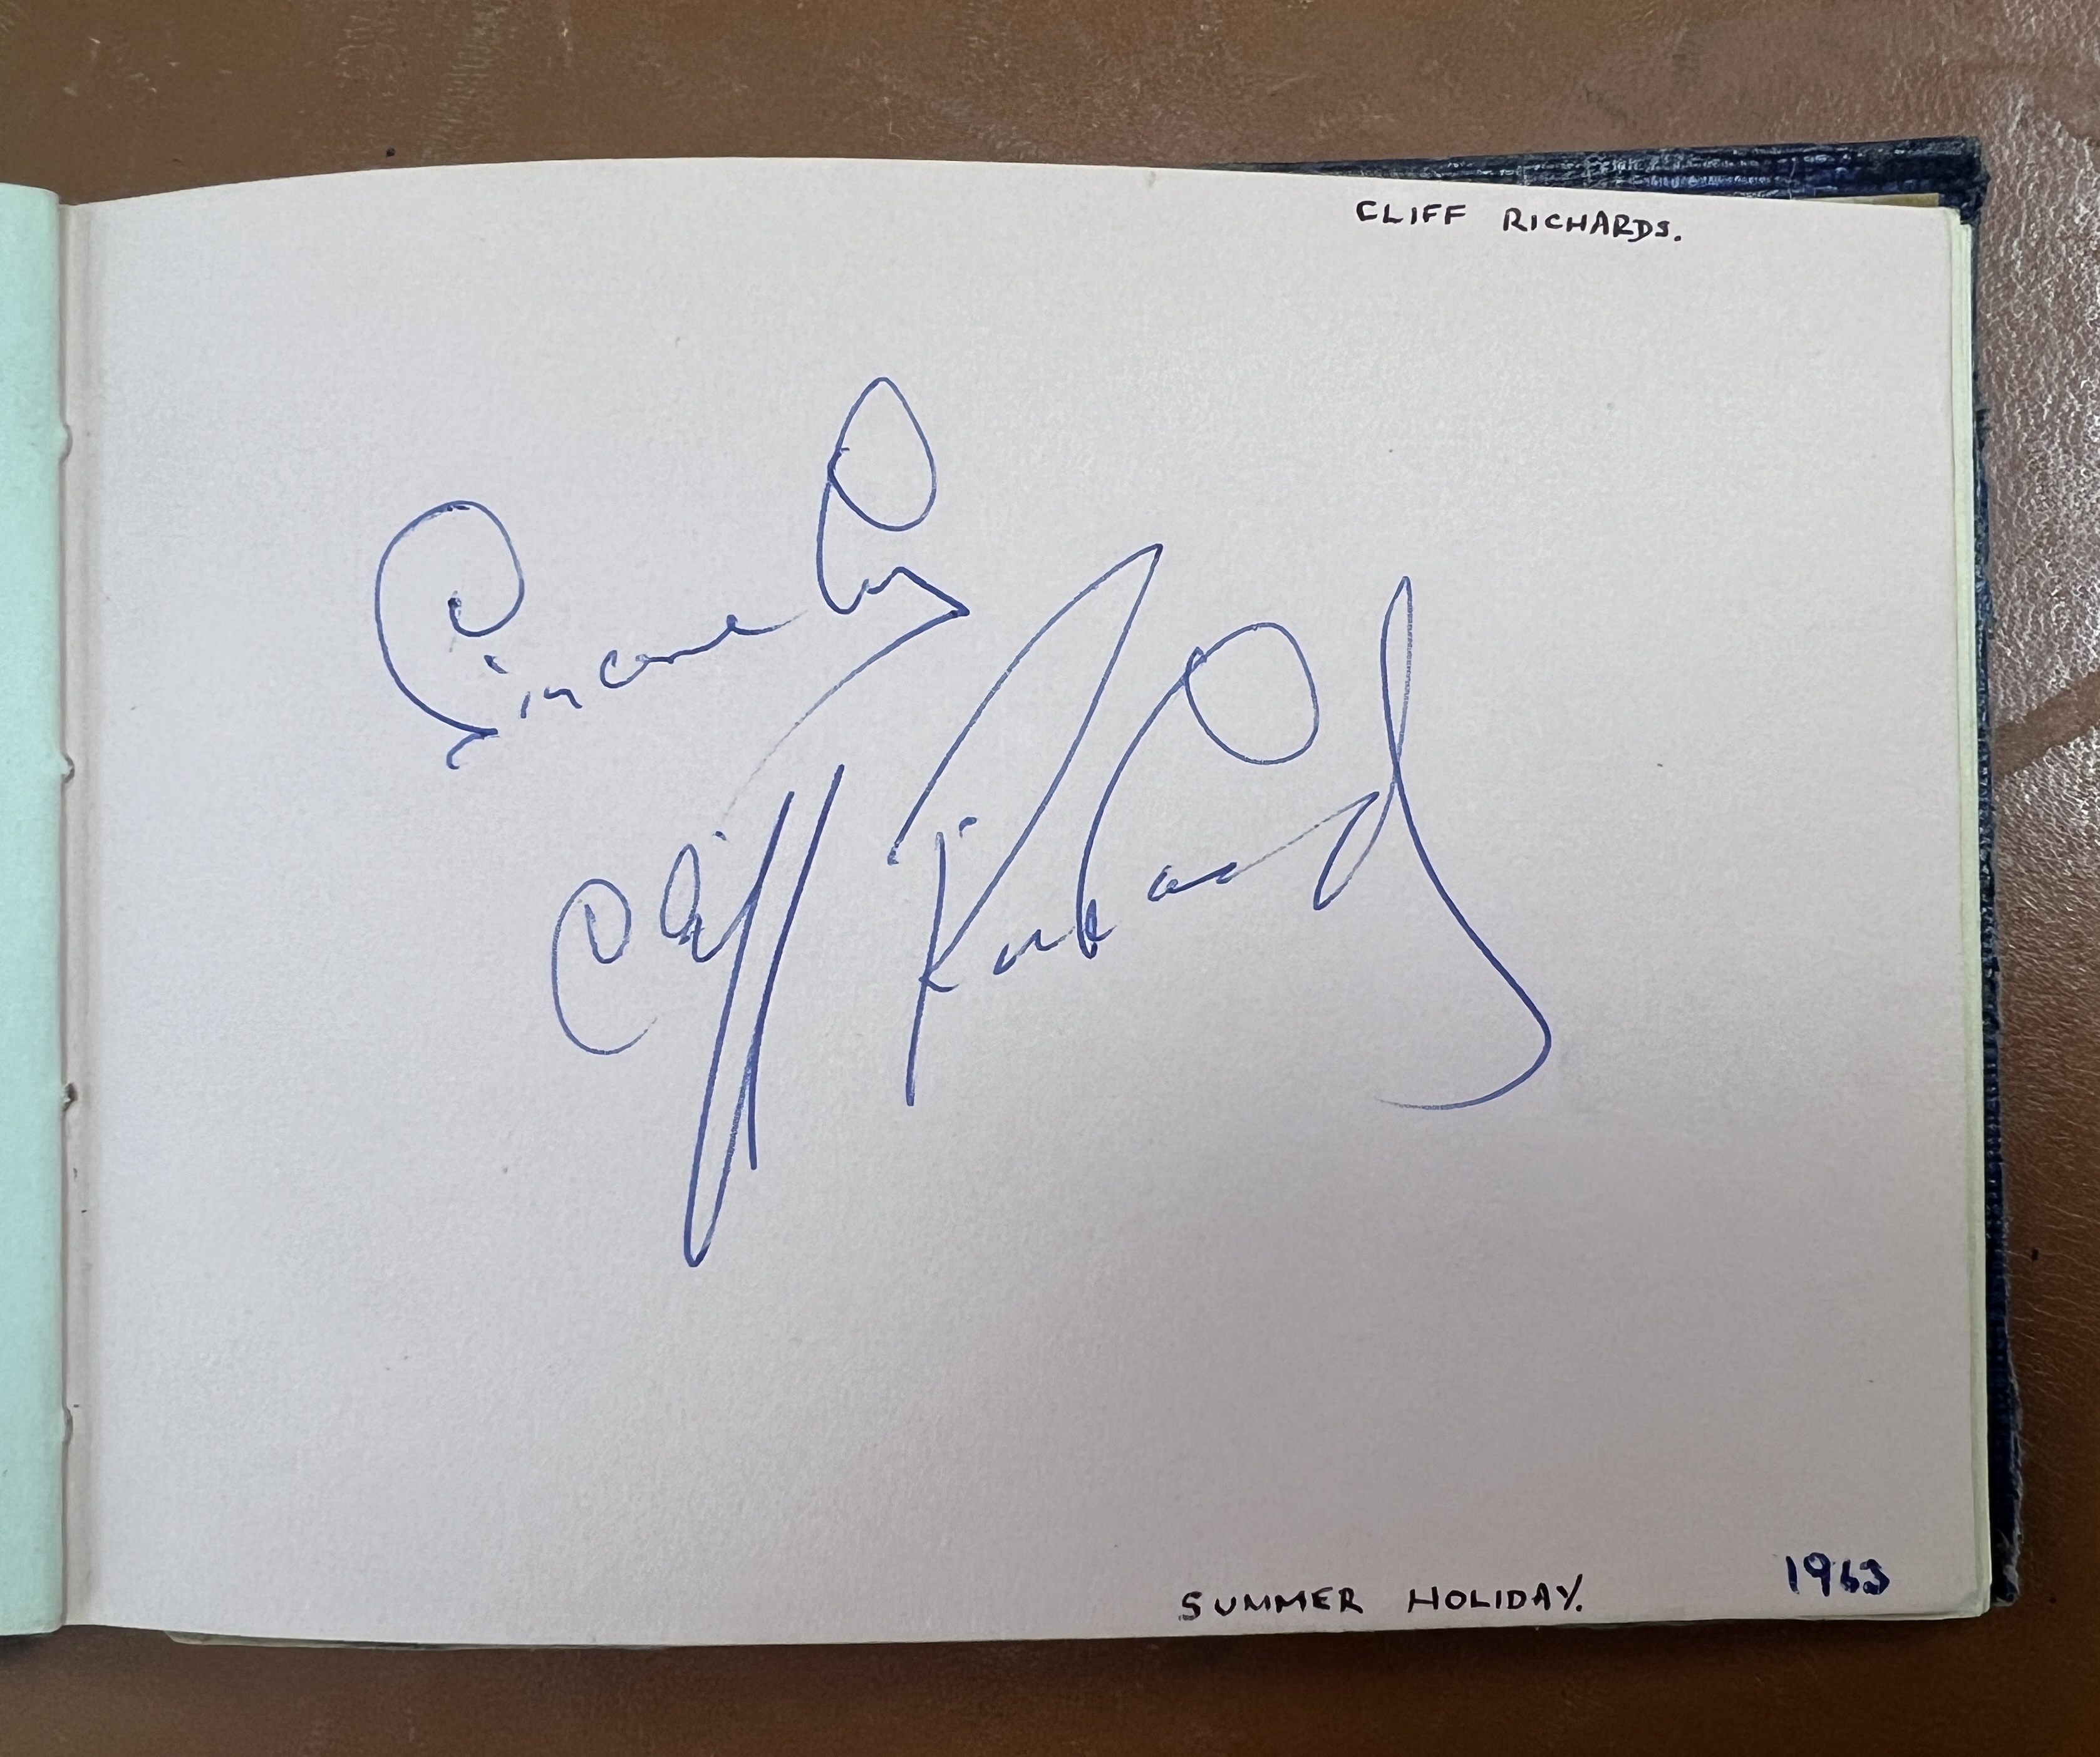 A 1960's autograph album containing autographs of various celebrities including Cliff Richard, - Image 28 of 37